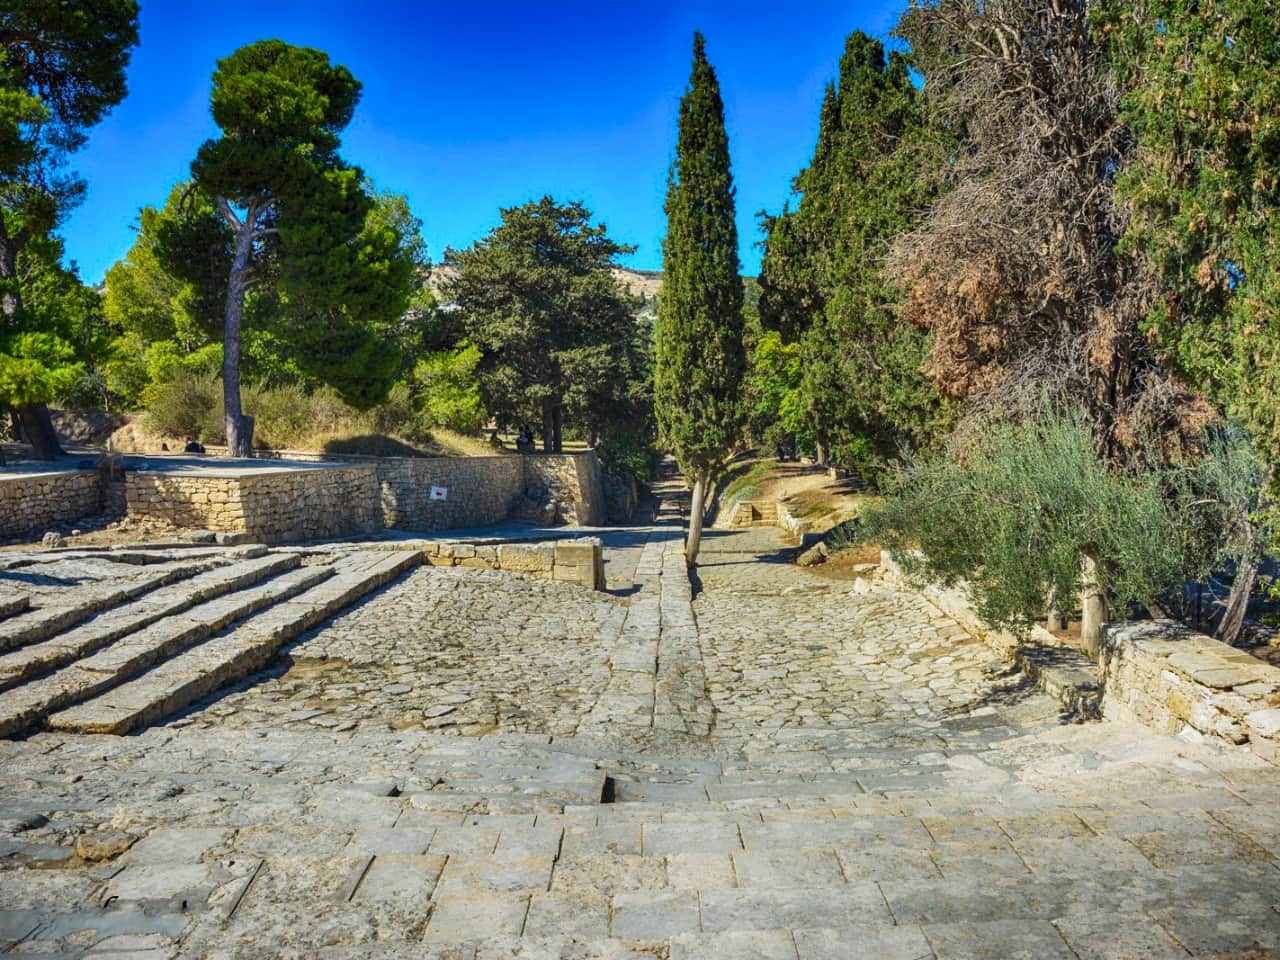 Private Tour to Knossos Minoan Palace, Archaeological Museum departing from Chania, chania best tour to knossos and museum, chania town activities, tour to minoan palace and archaeological museum, museum heraklion small private tour